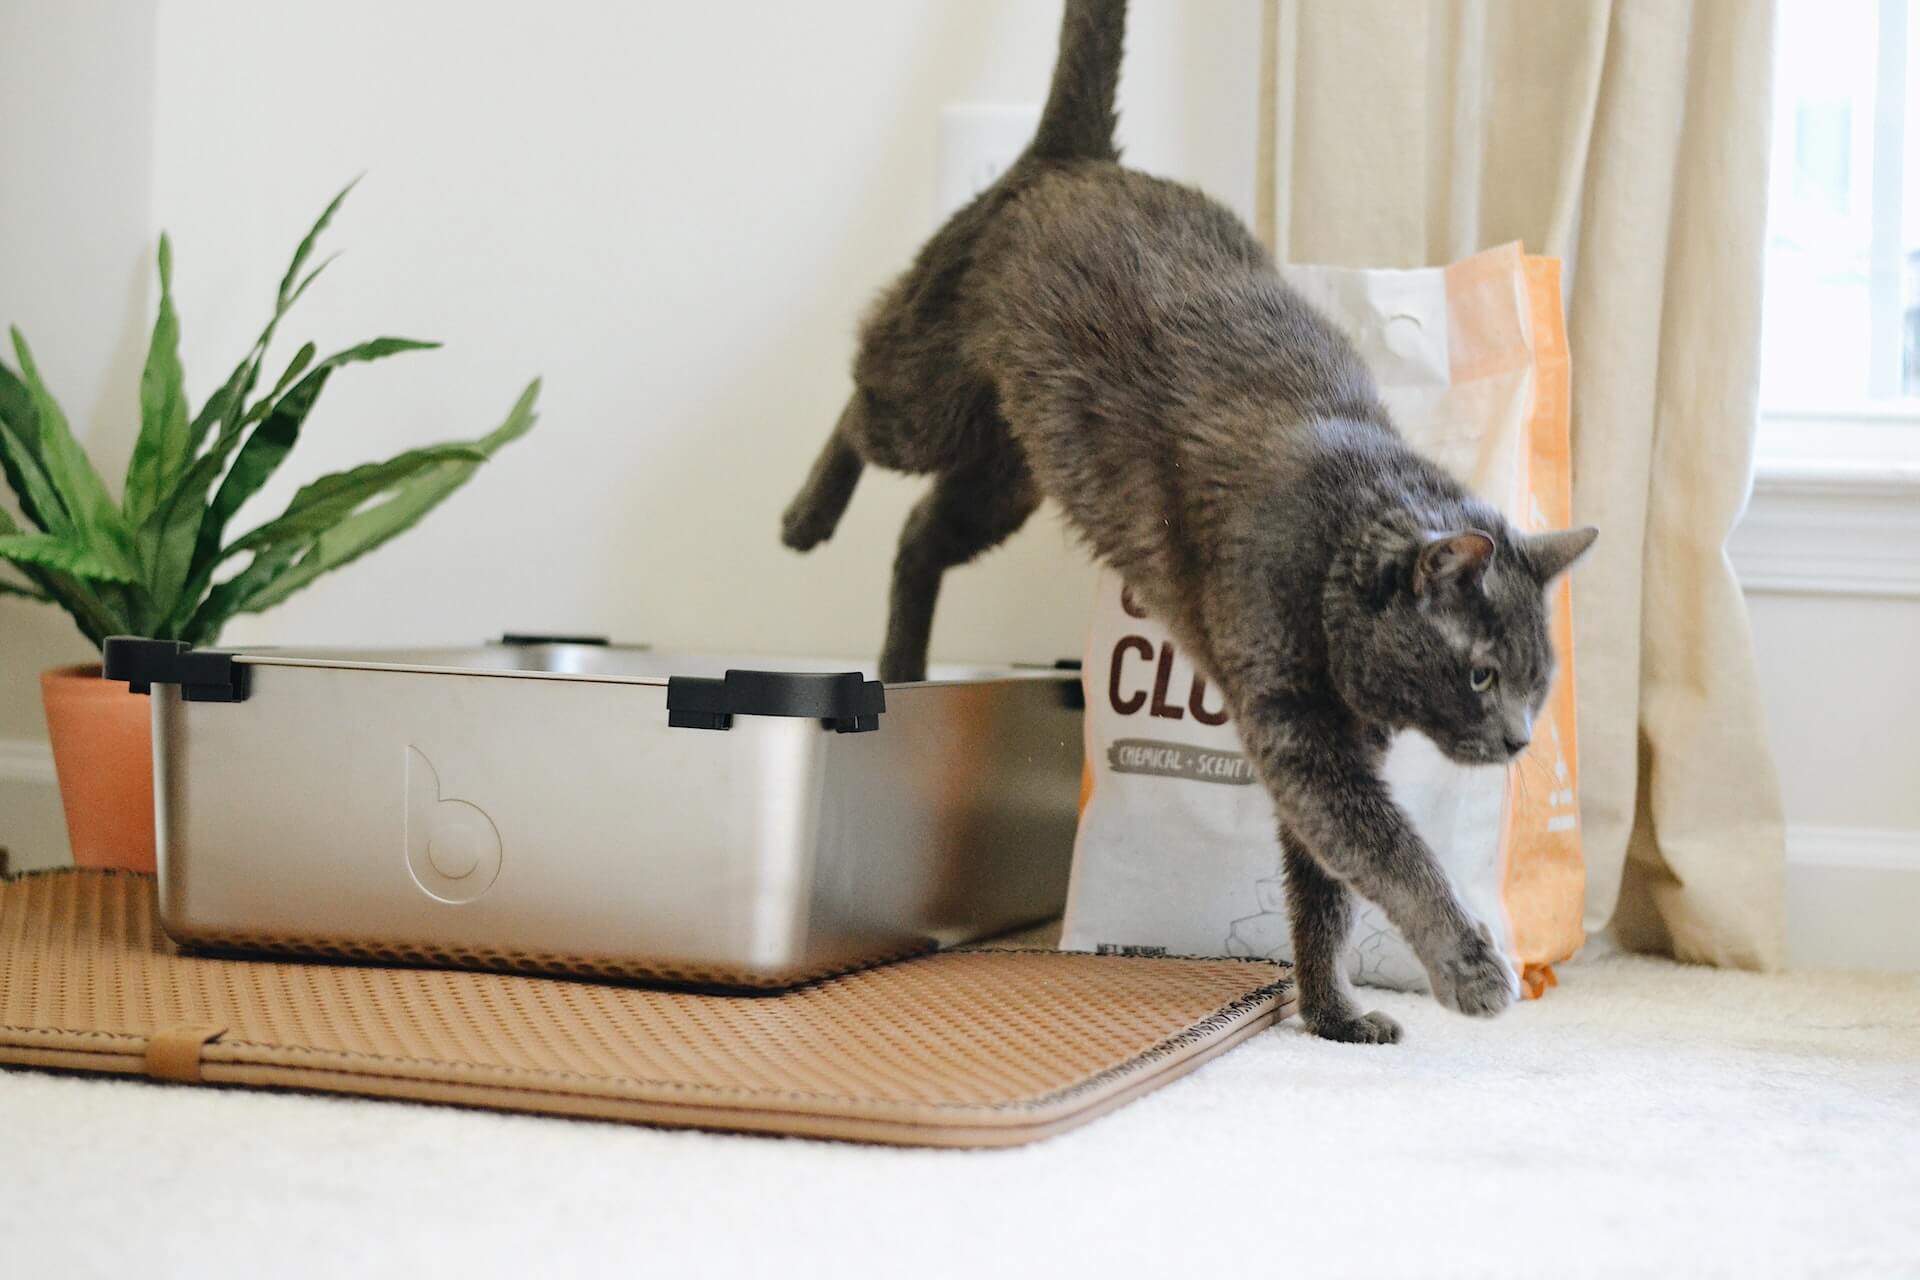 Dilute tortoiseshell cat jumping out of a silver litter box.